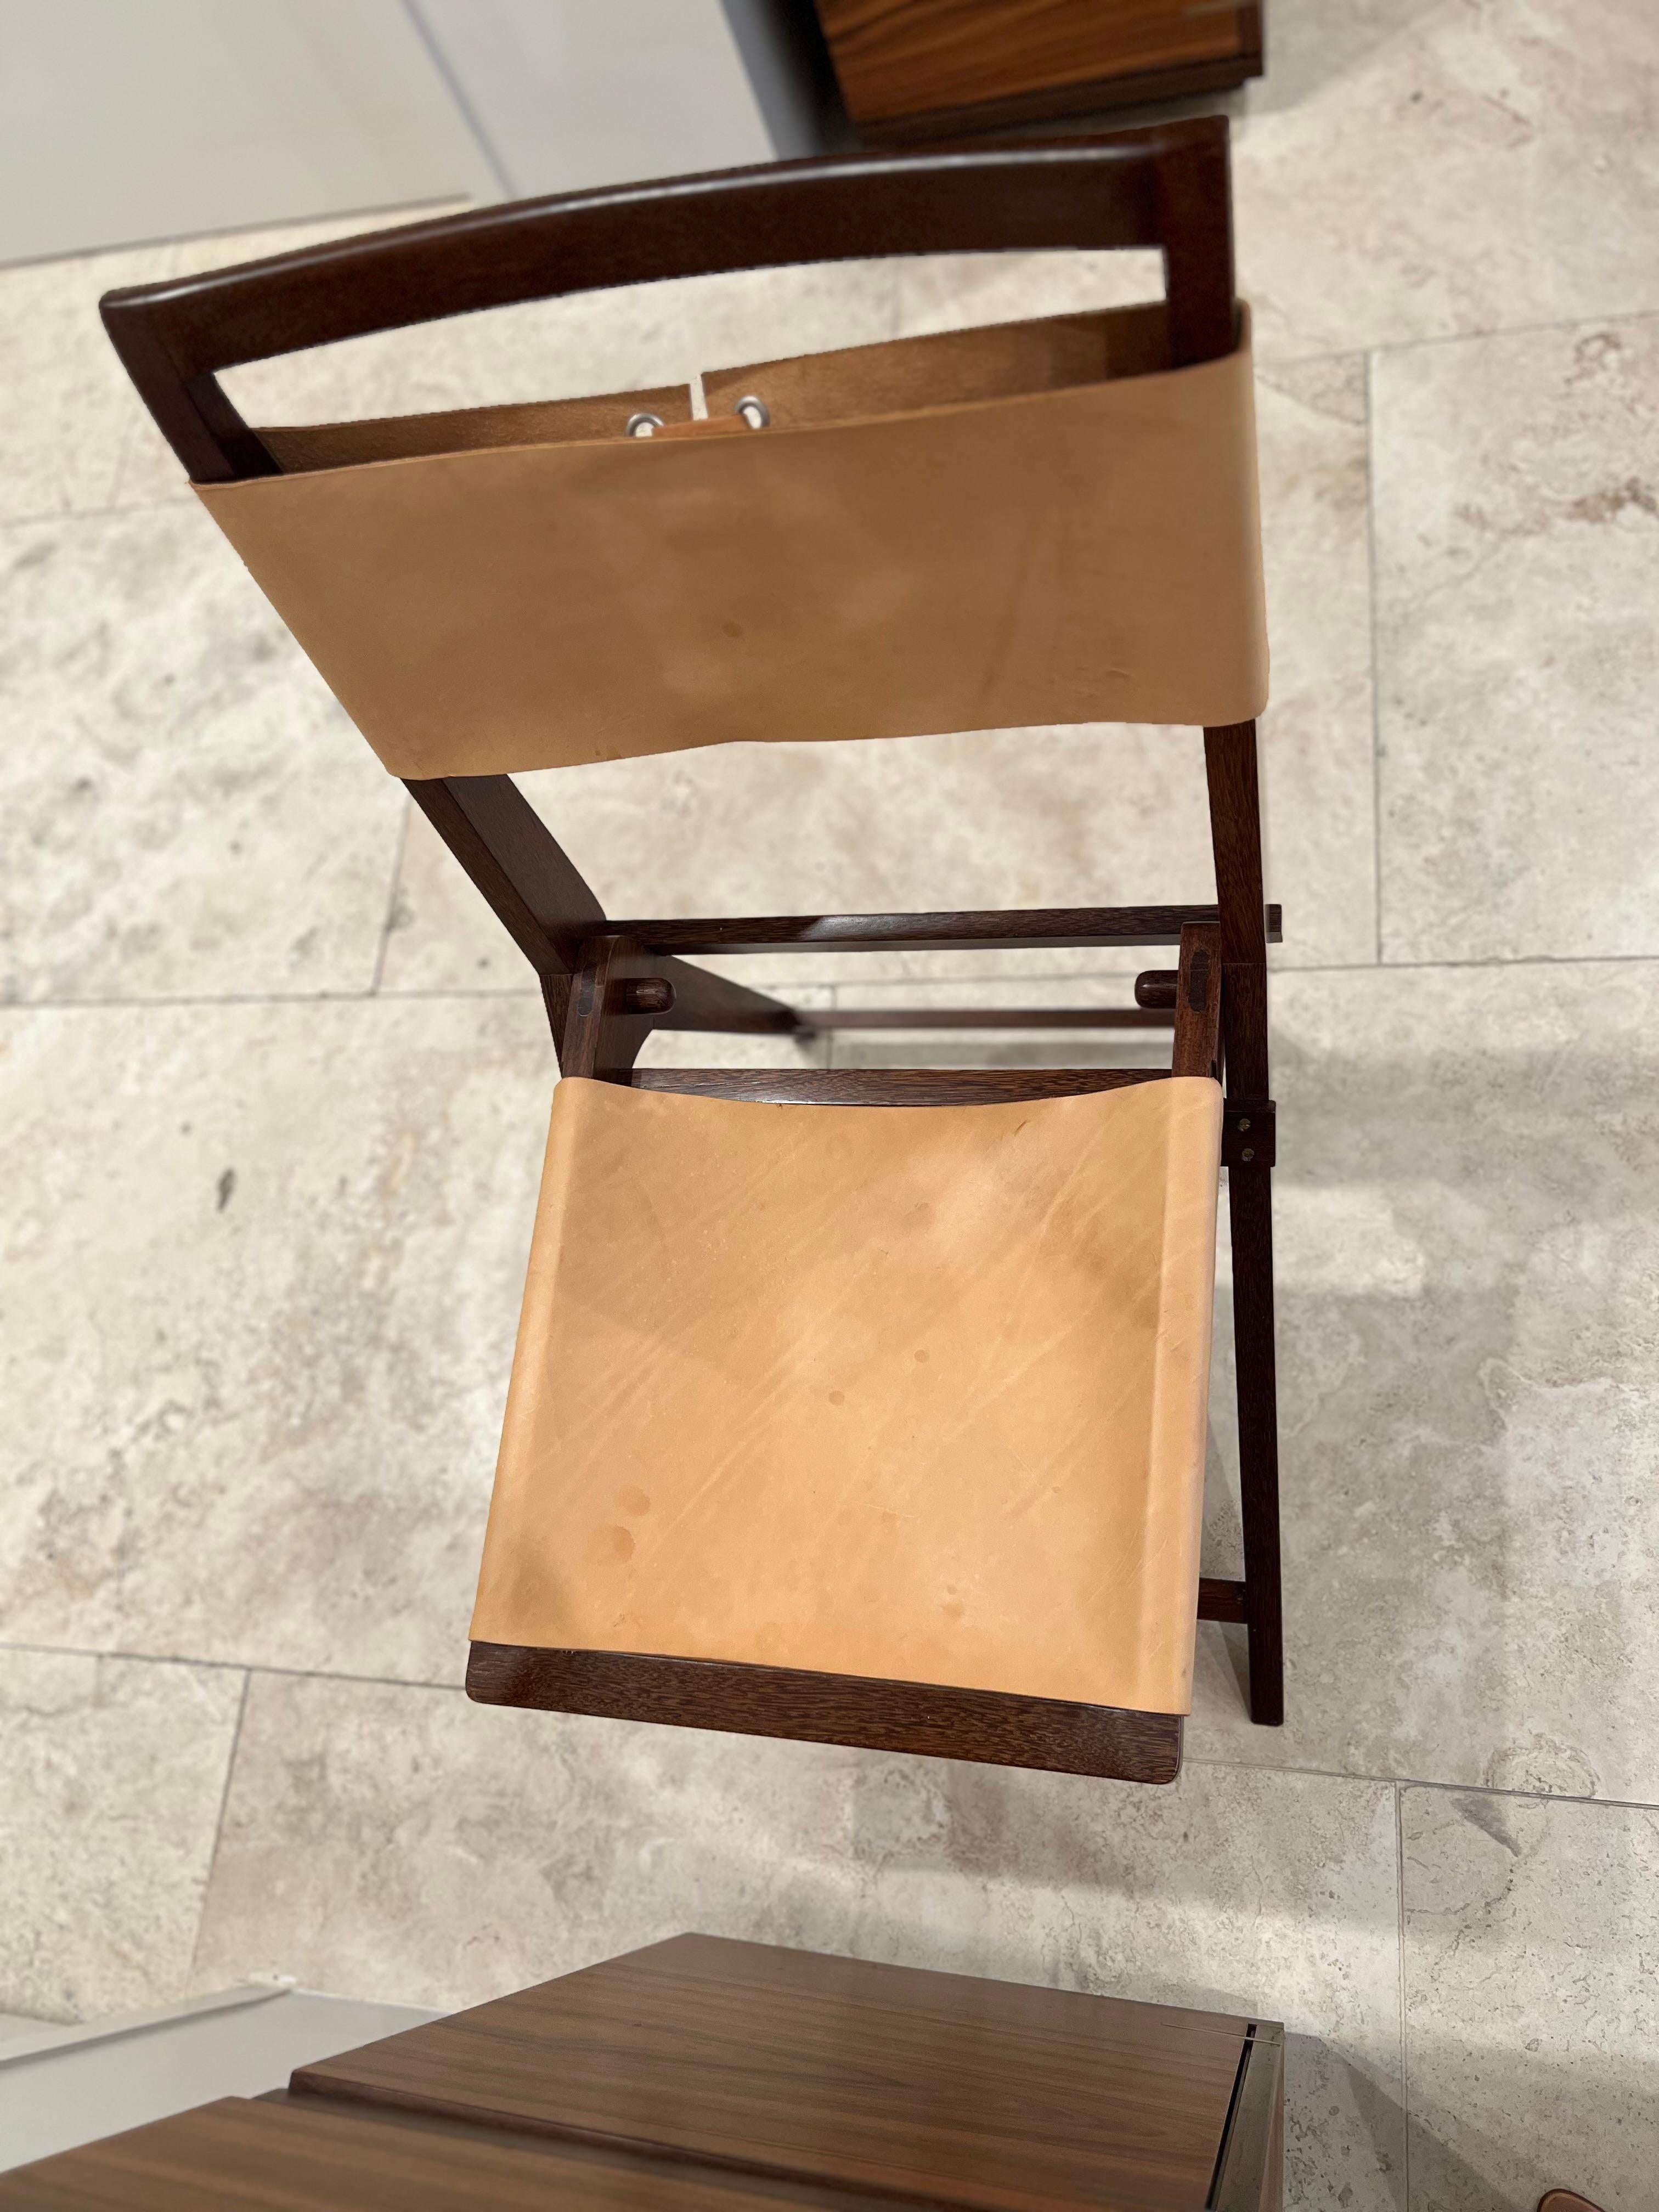 MASP Auditorium Chair by Lina Bo Bardi In New Condition For Sale In Houston, TX